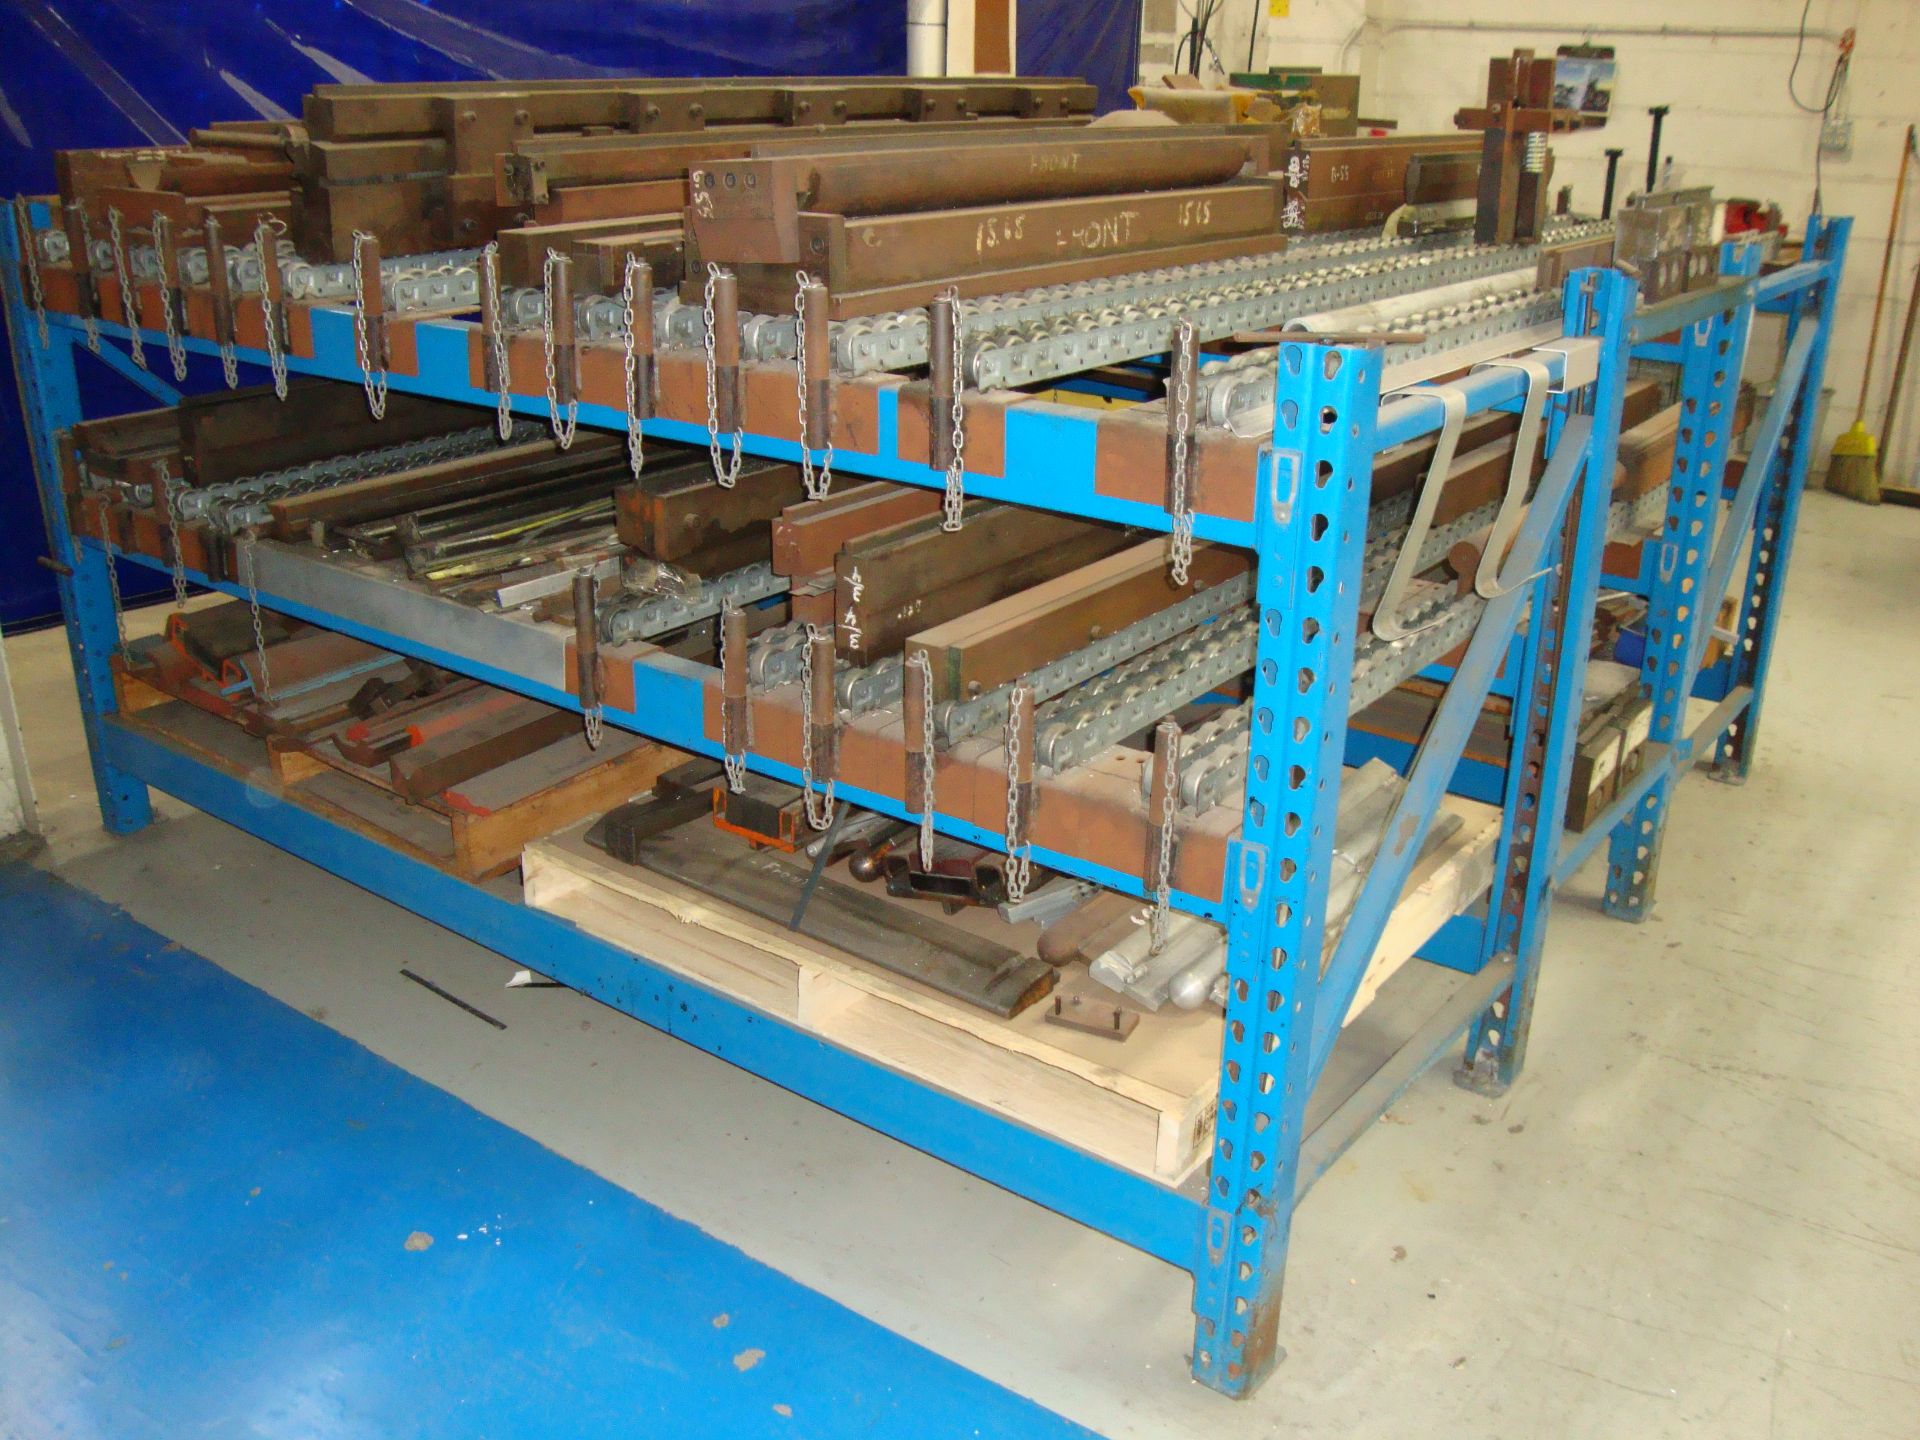 Press Brake Rolling Tooling Rack ONLY, approx. 103" x 96" x 48" tall